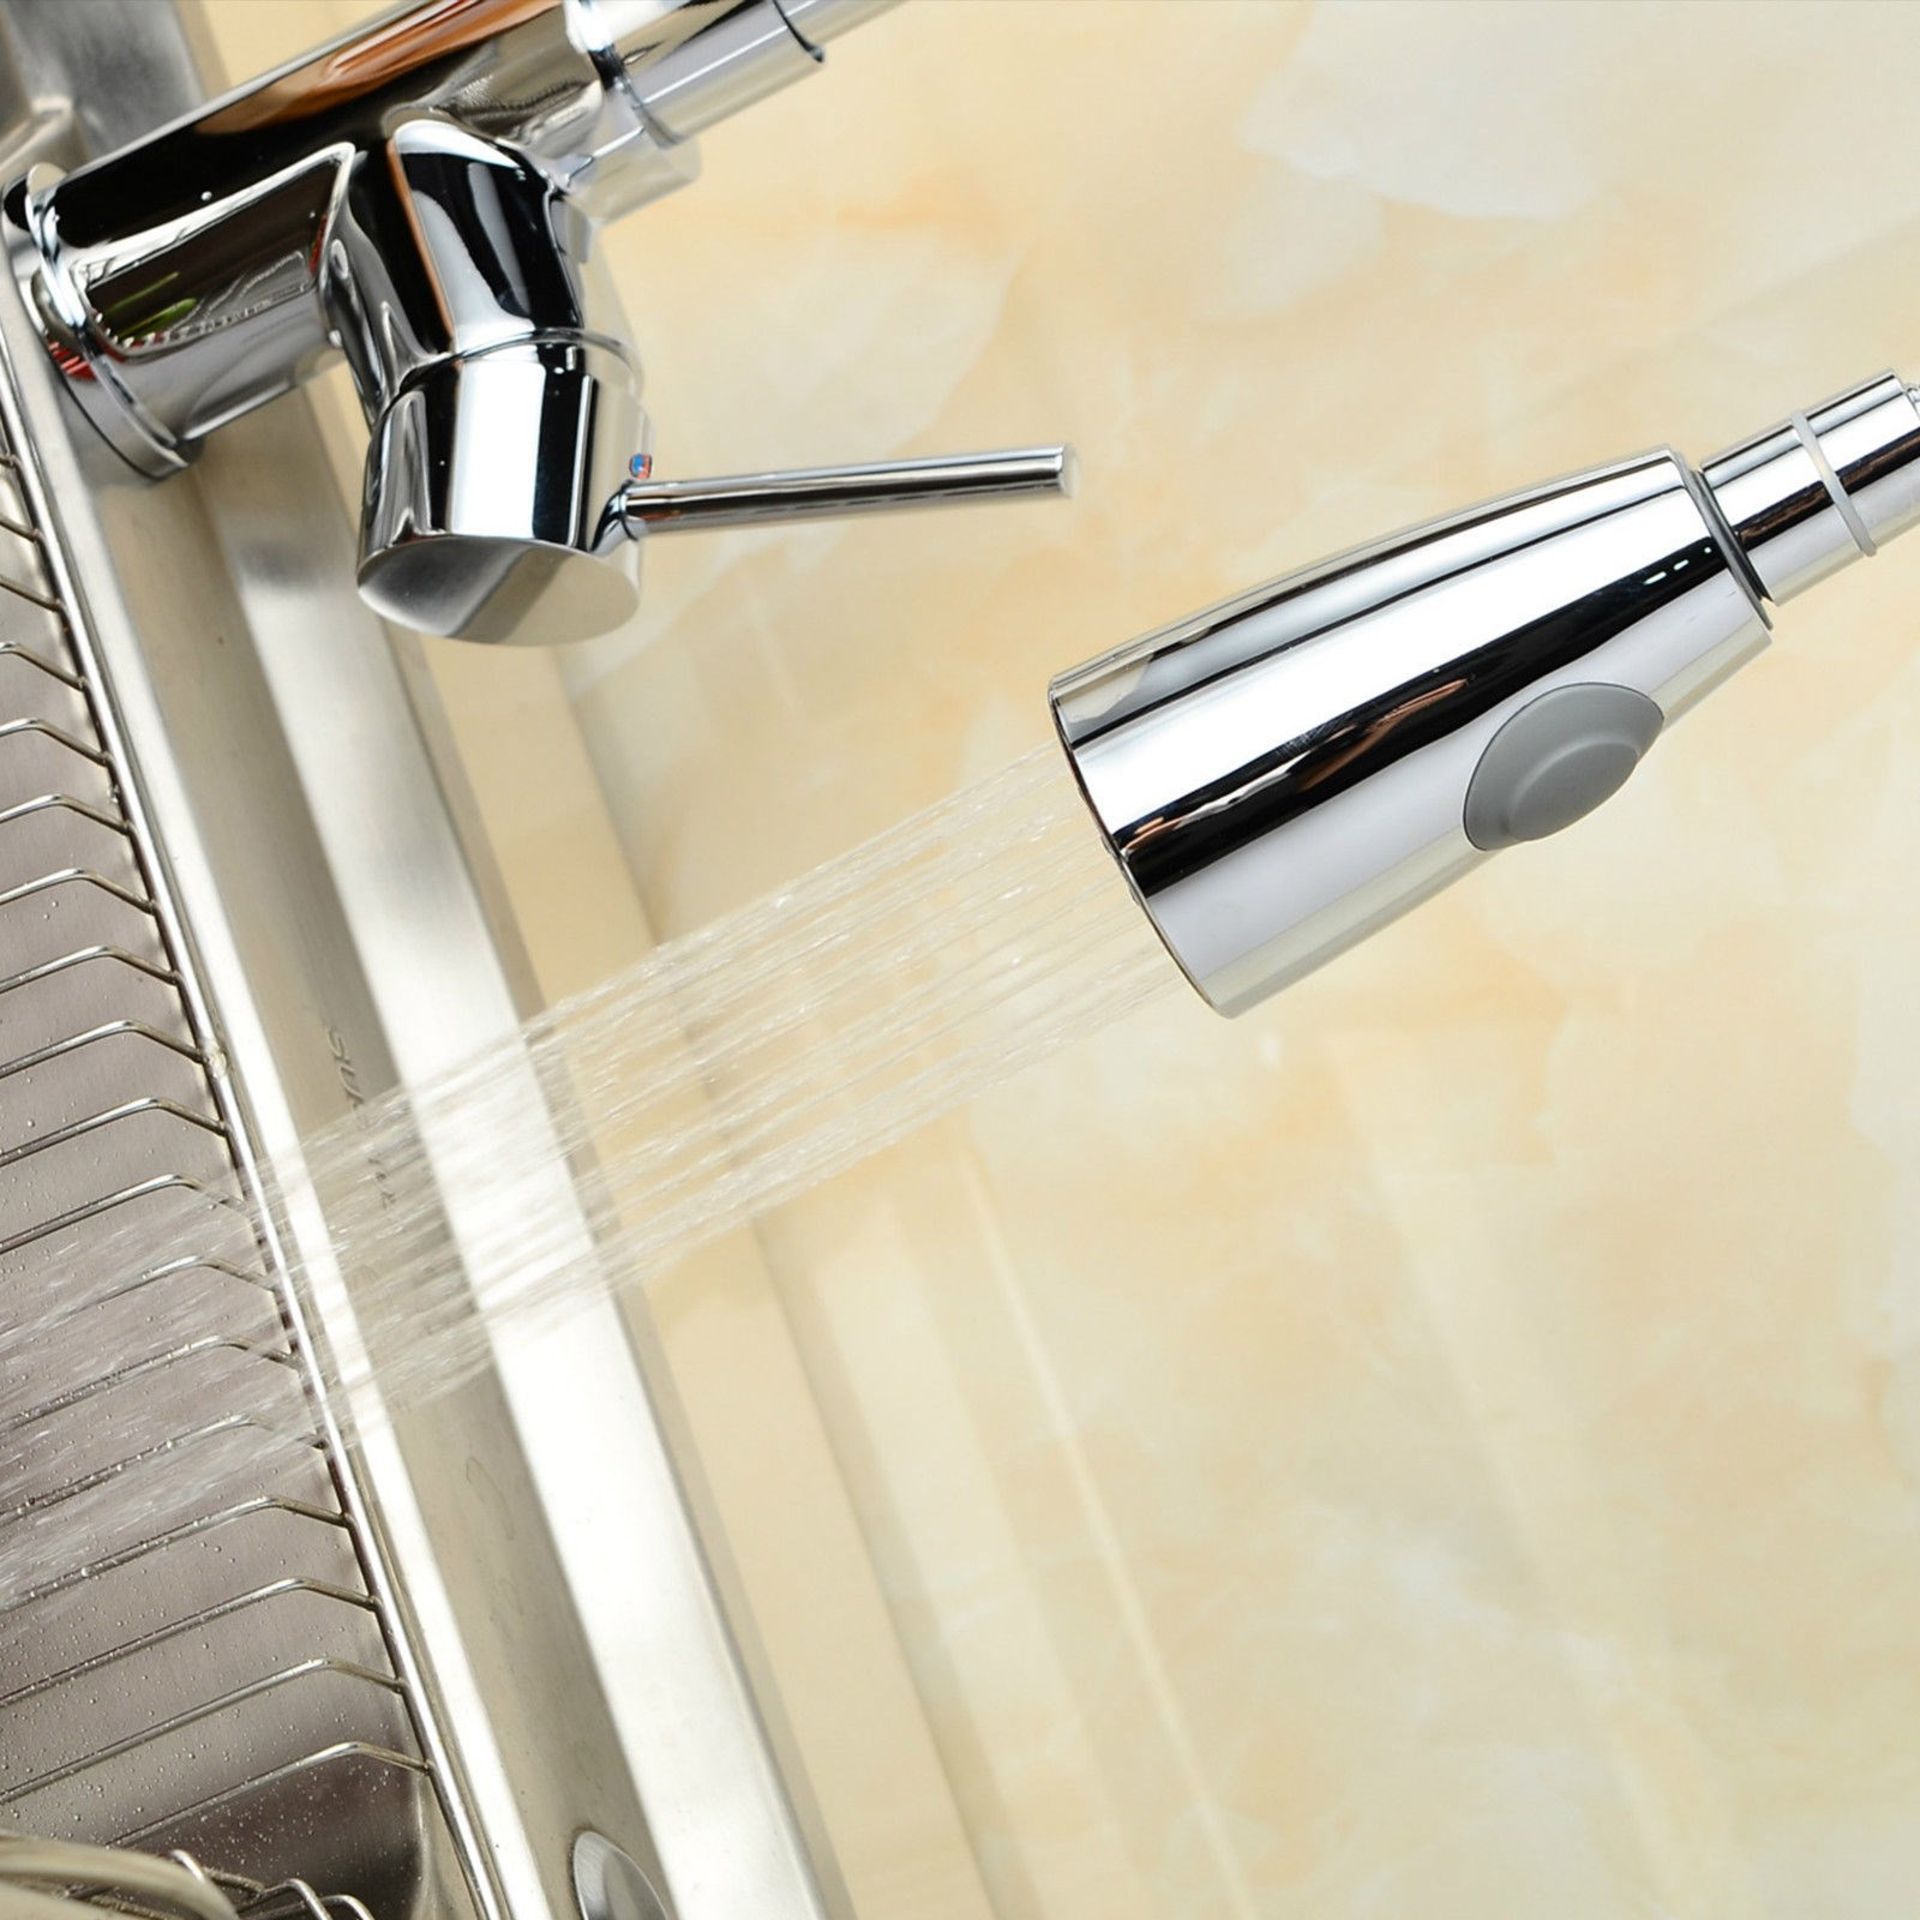 (SM19) Della Modern Monobloc Chrome Brass Pull Out Spray Mixer Tap. RRP £299.99. This tap is from - Image 3 of 4